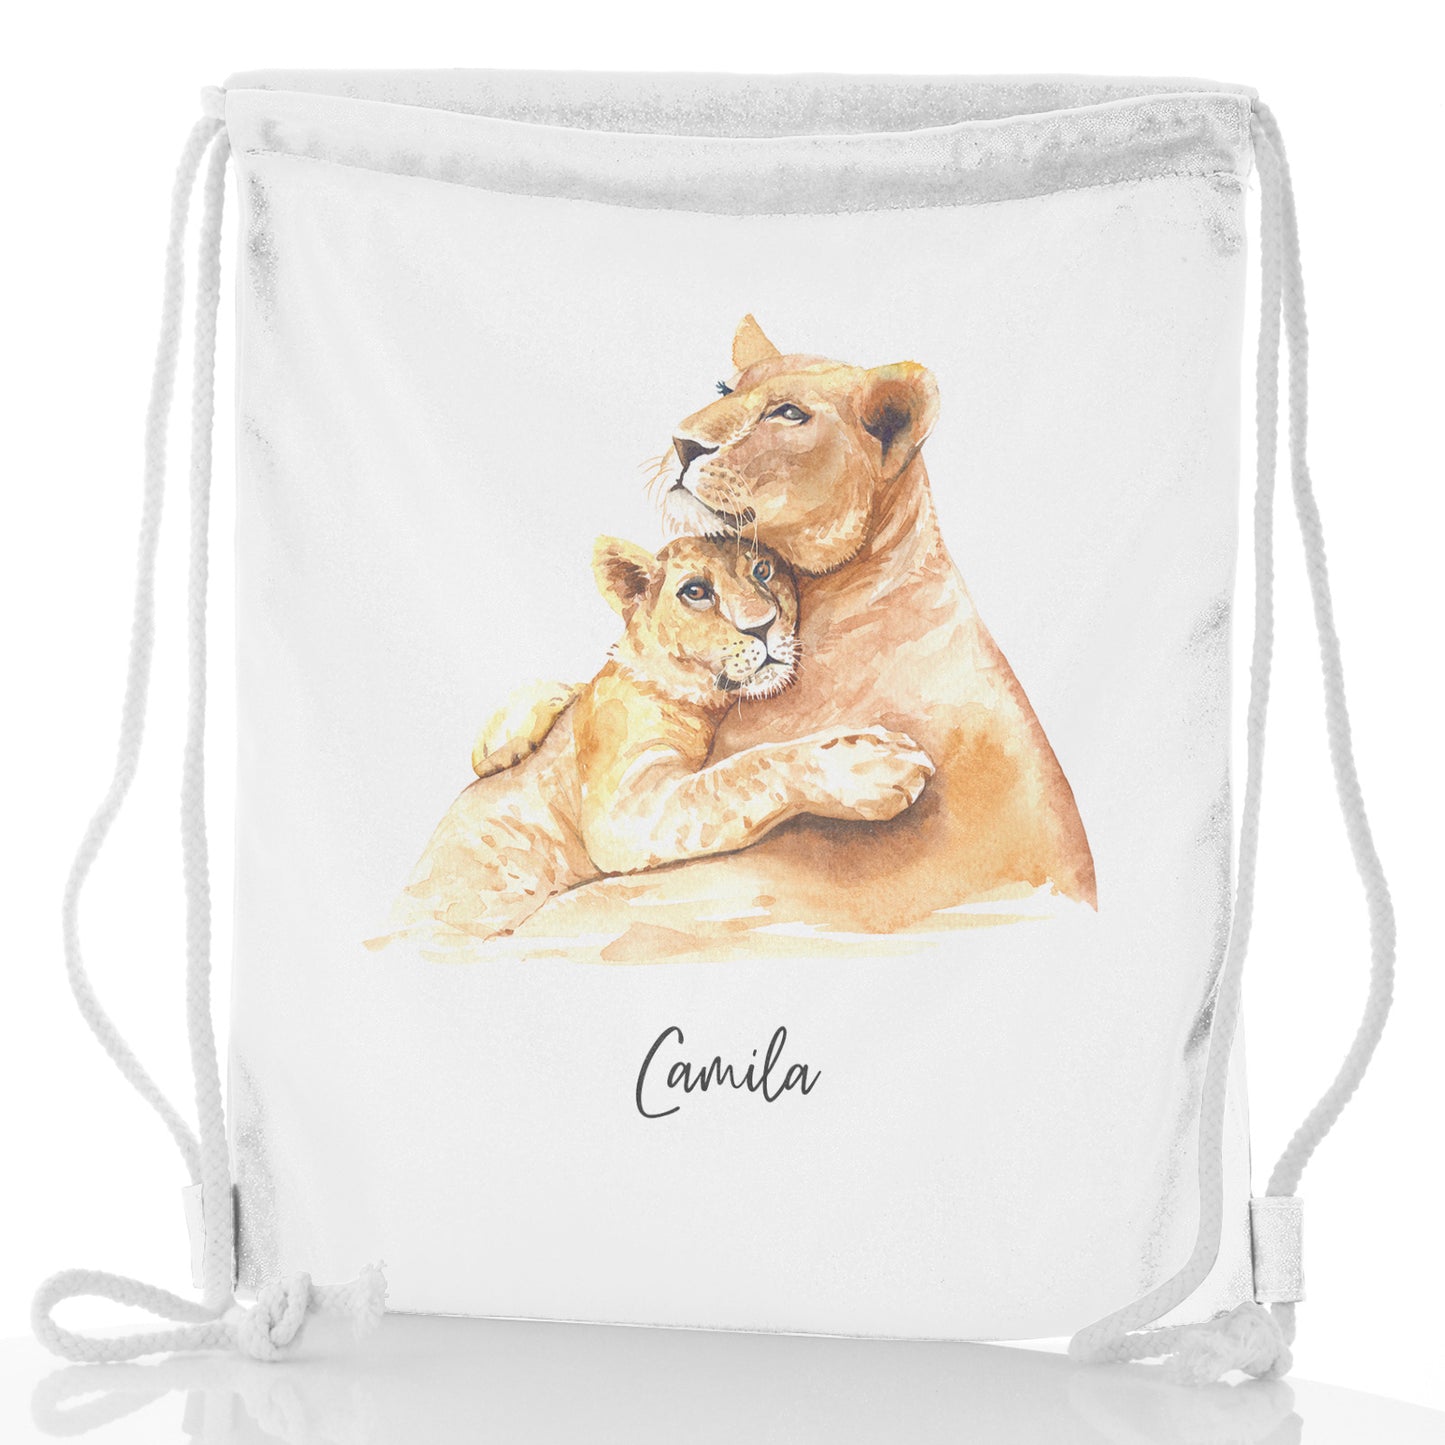 Personalised Glitter Drawstring Backpack with Welcoming Text and Embracing Mum and Baby Lions